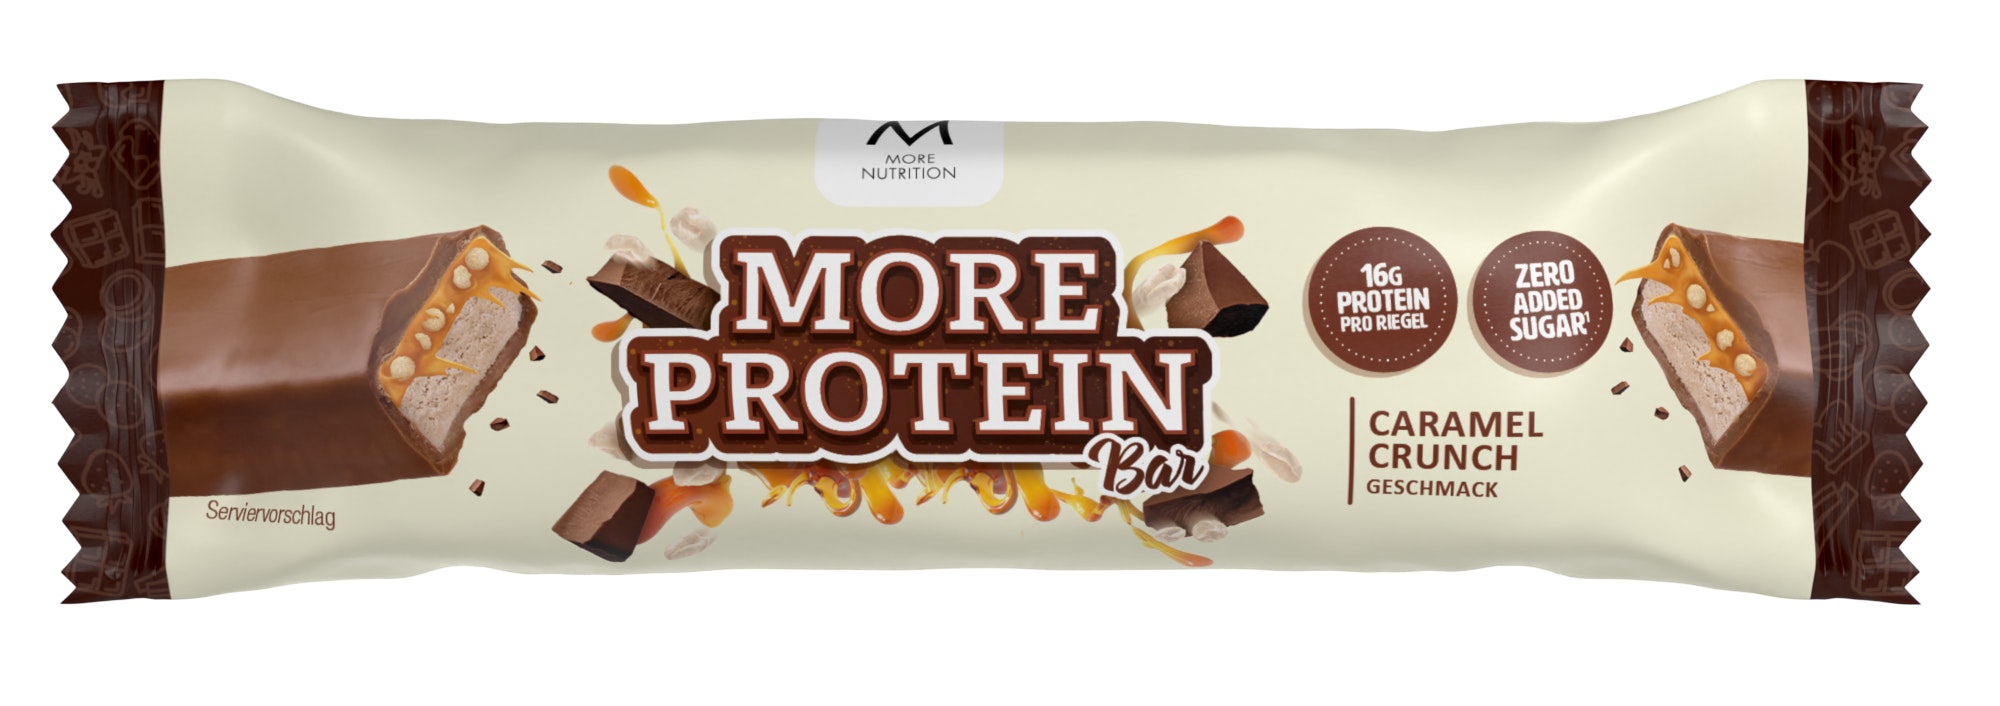 More Protein Bars